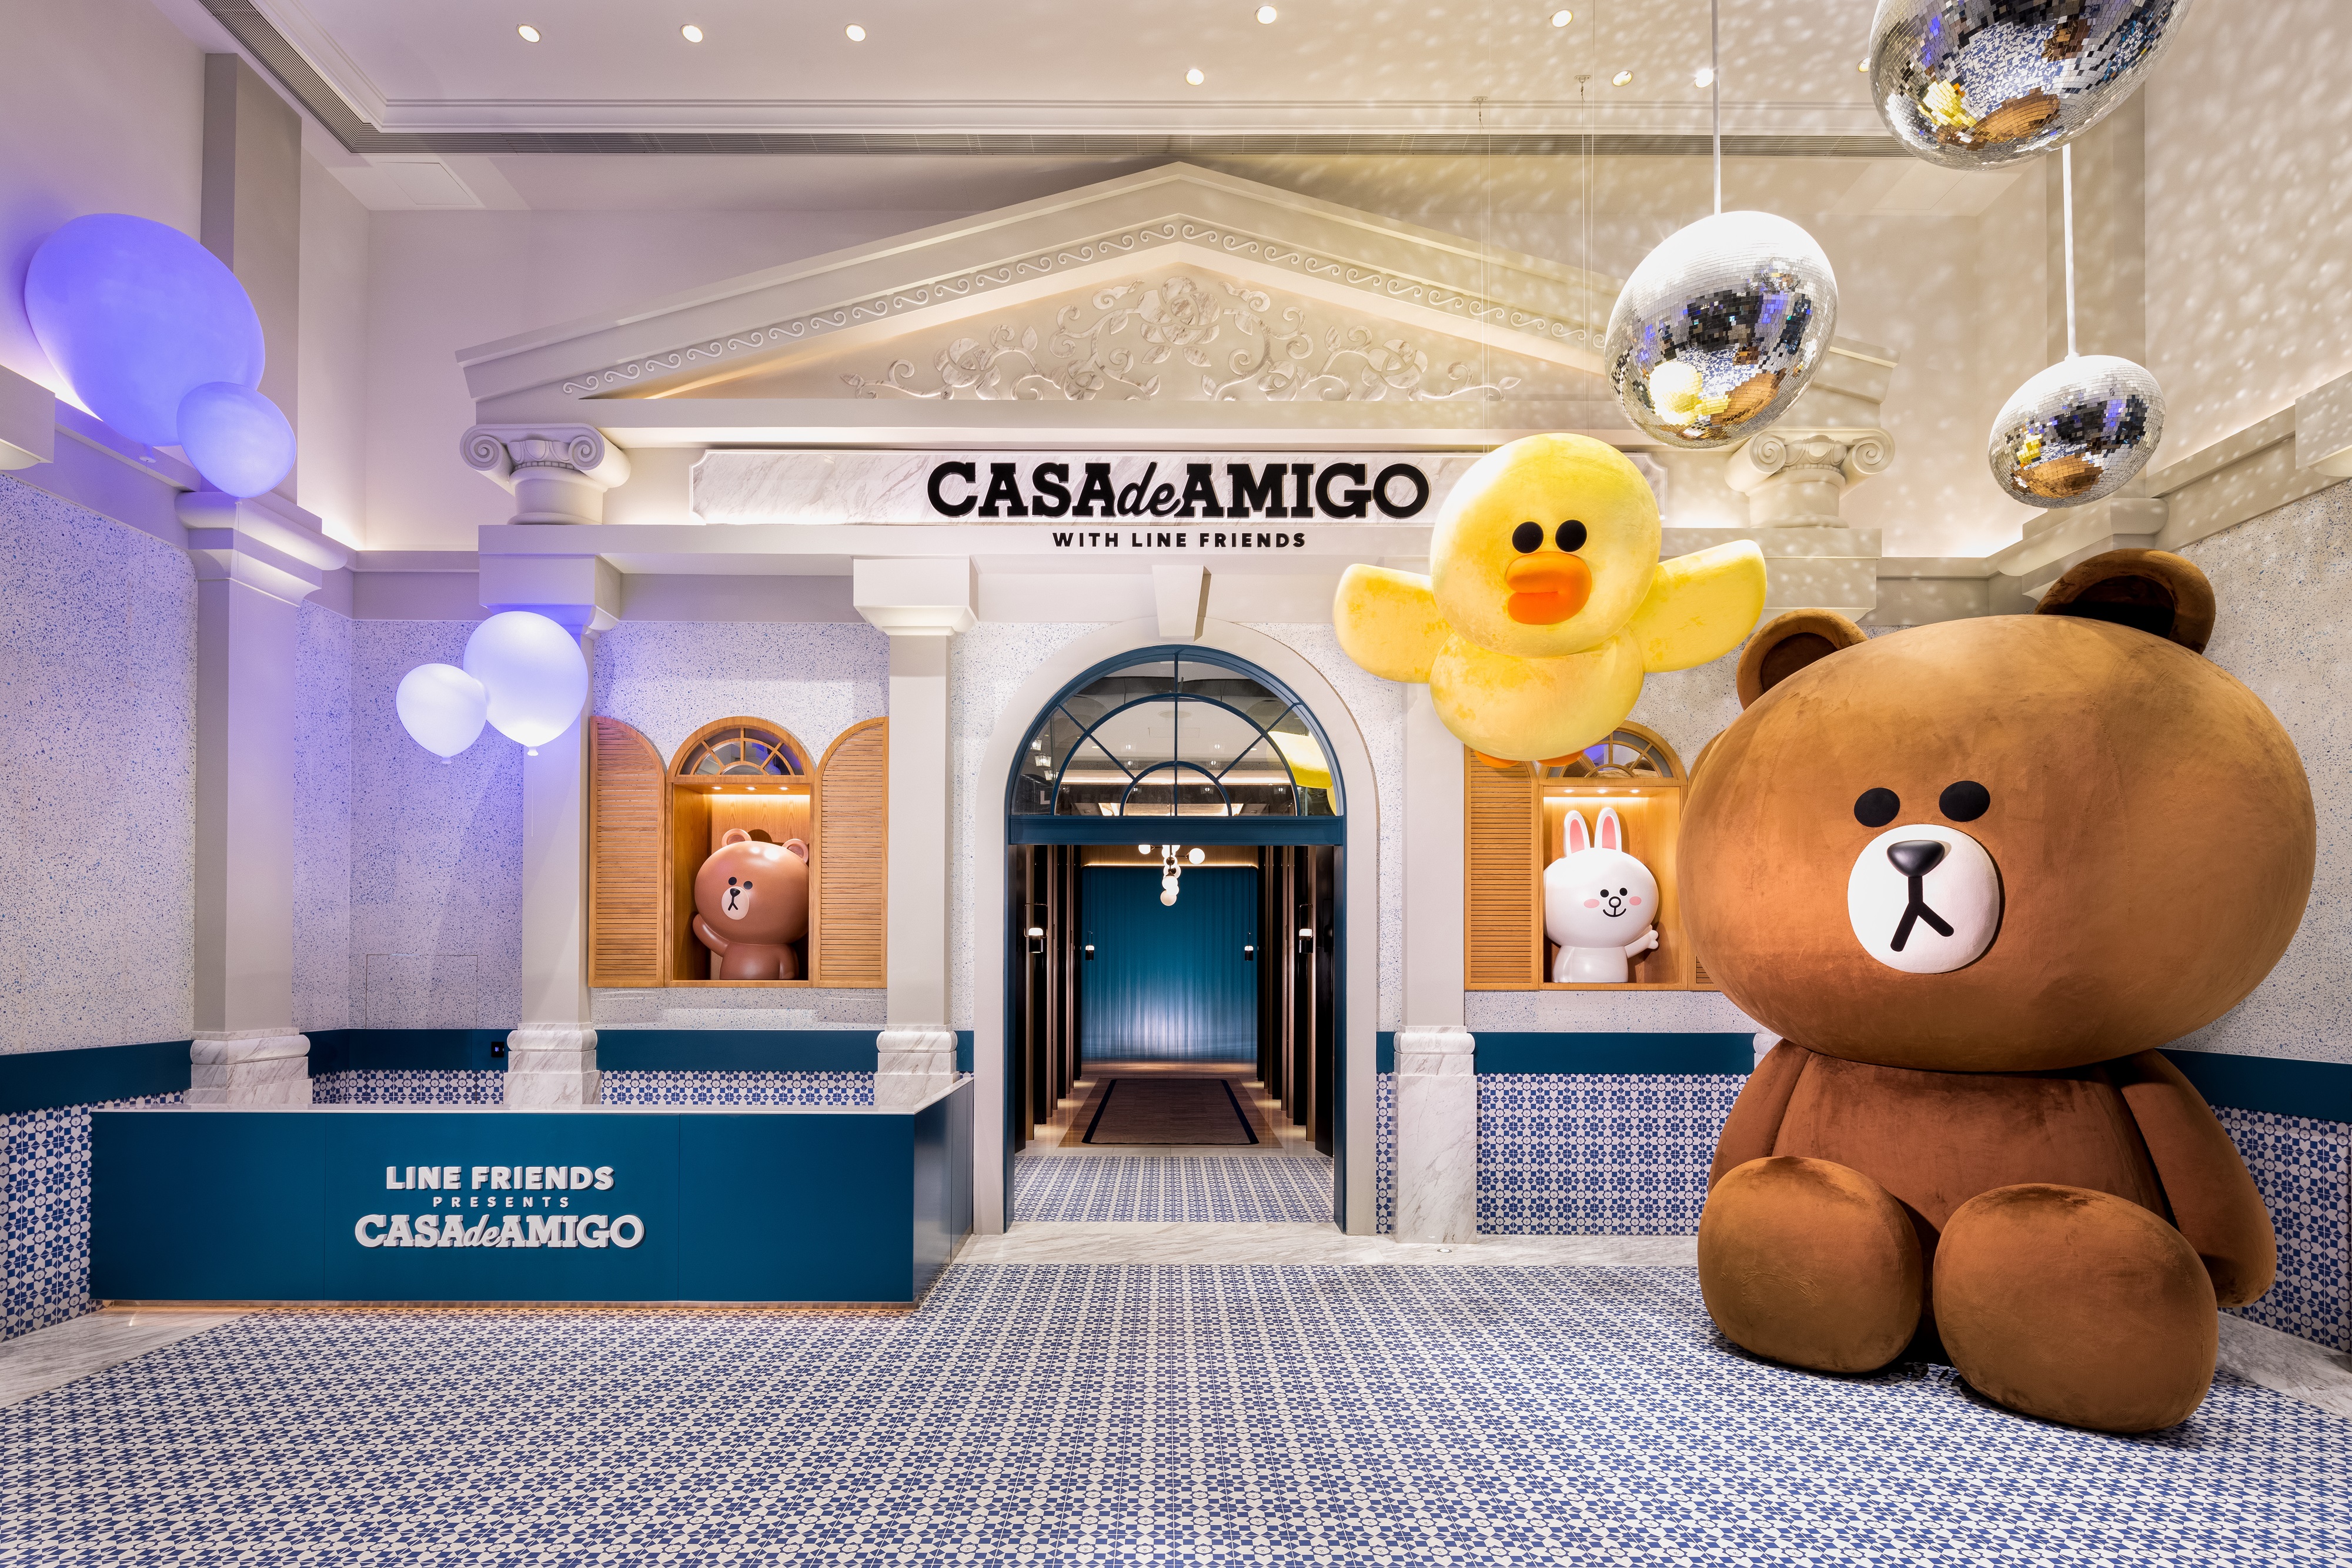 The lobby of LINE FRIENDS PRESENTS CASA DE AMIGO blends the characteristics of Macaos Portuguese architecture with the iconic MEGA BROWN and the unique FLYING SALLY of LINE FRIENDS